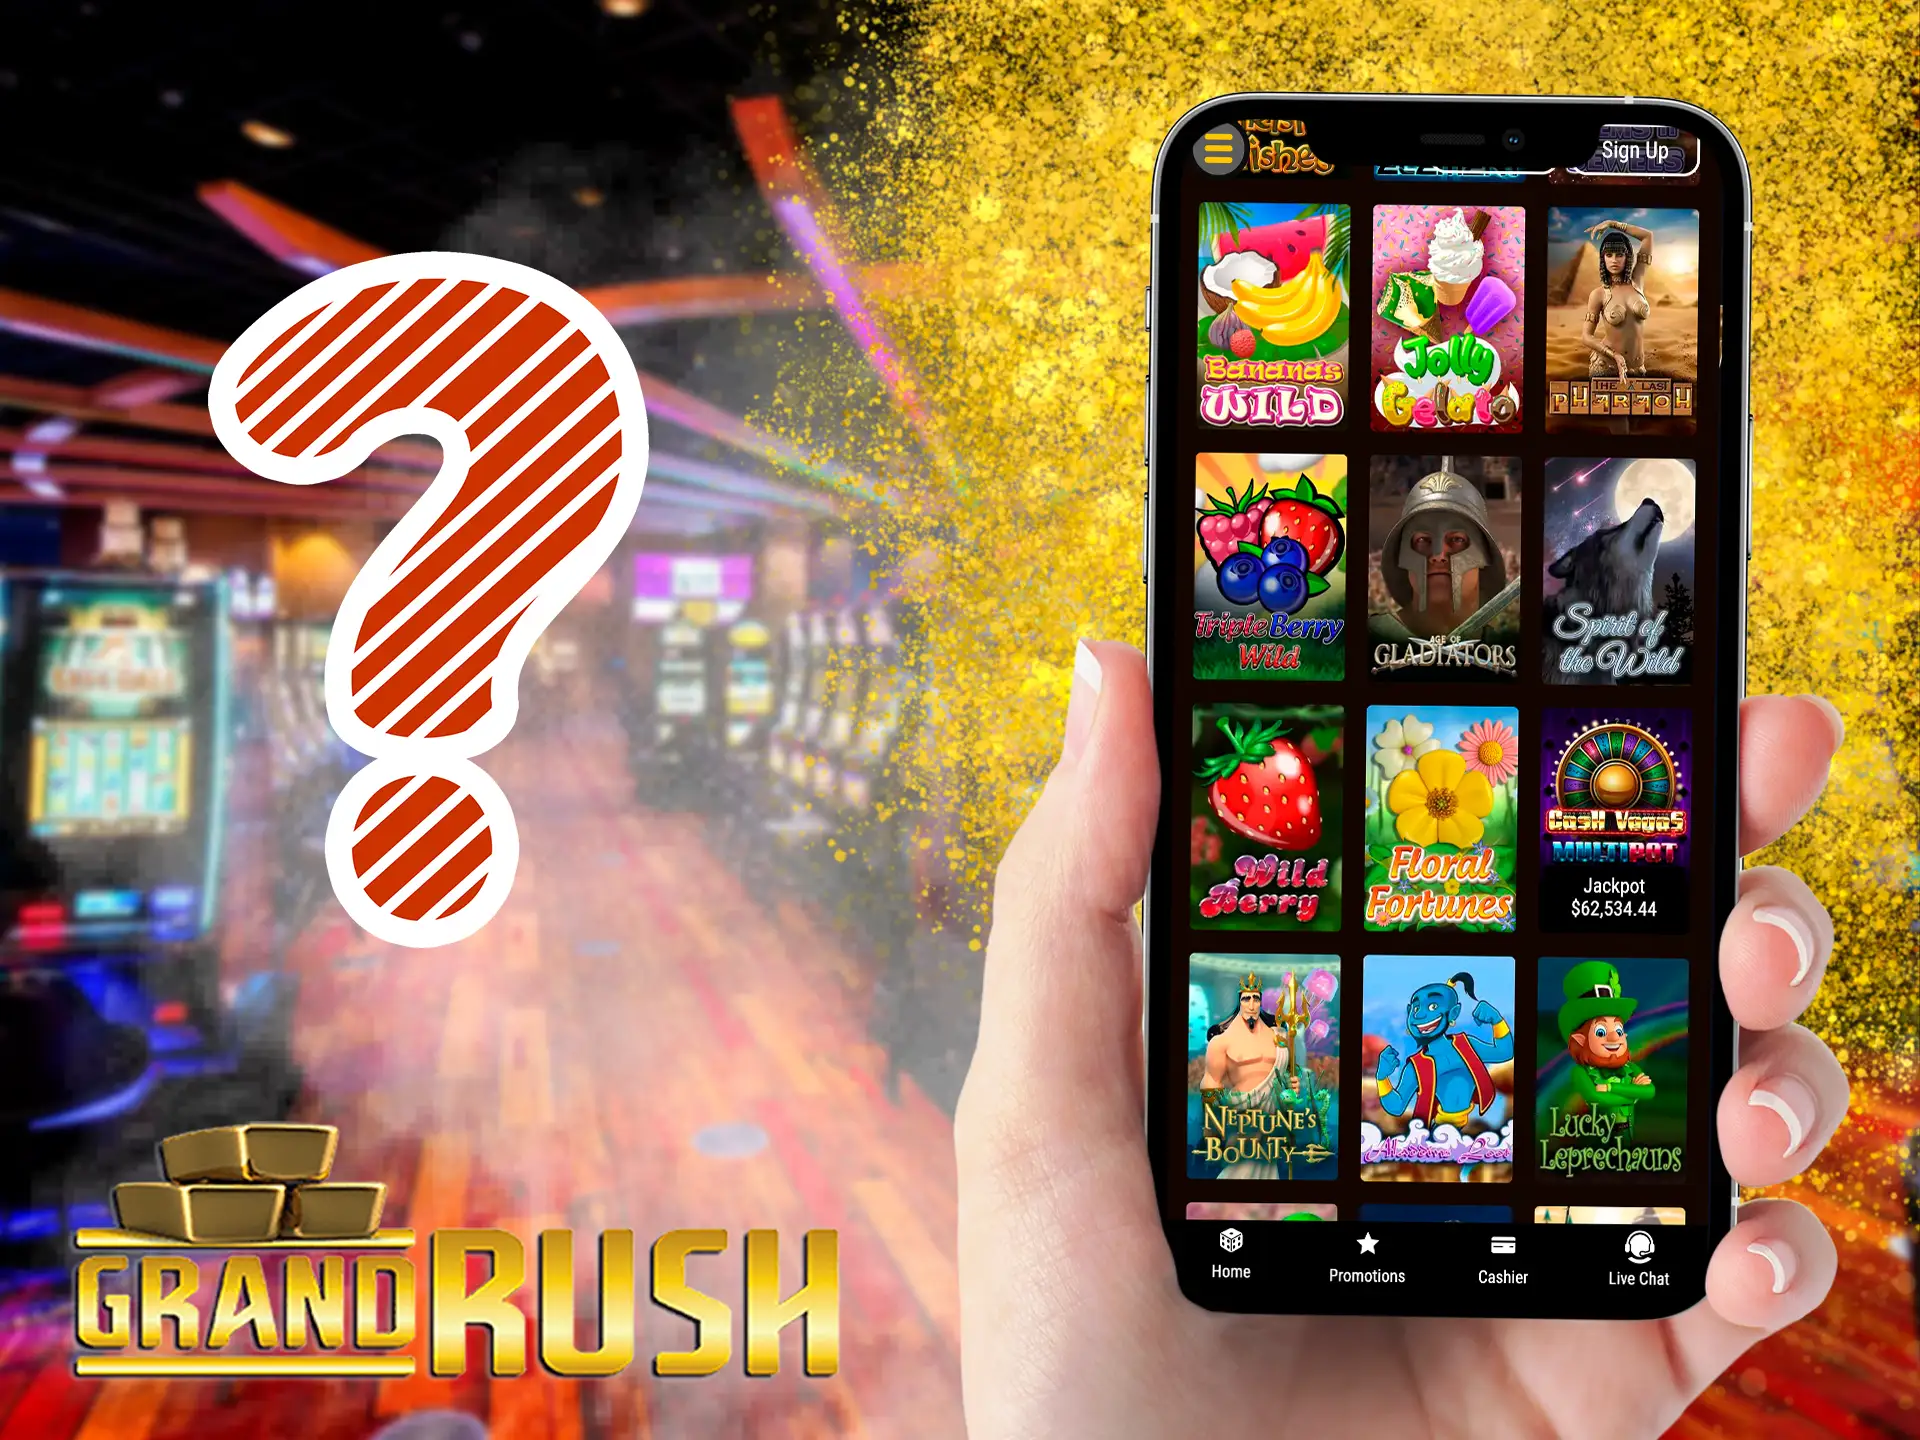 Register and deposit your account to start playing slots at Grand Rush casino.